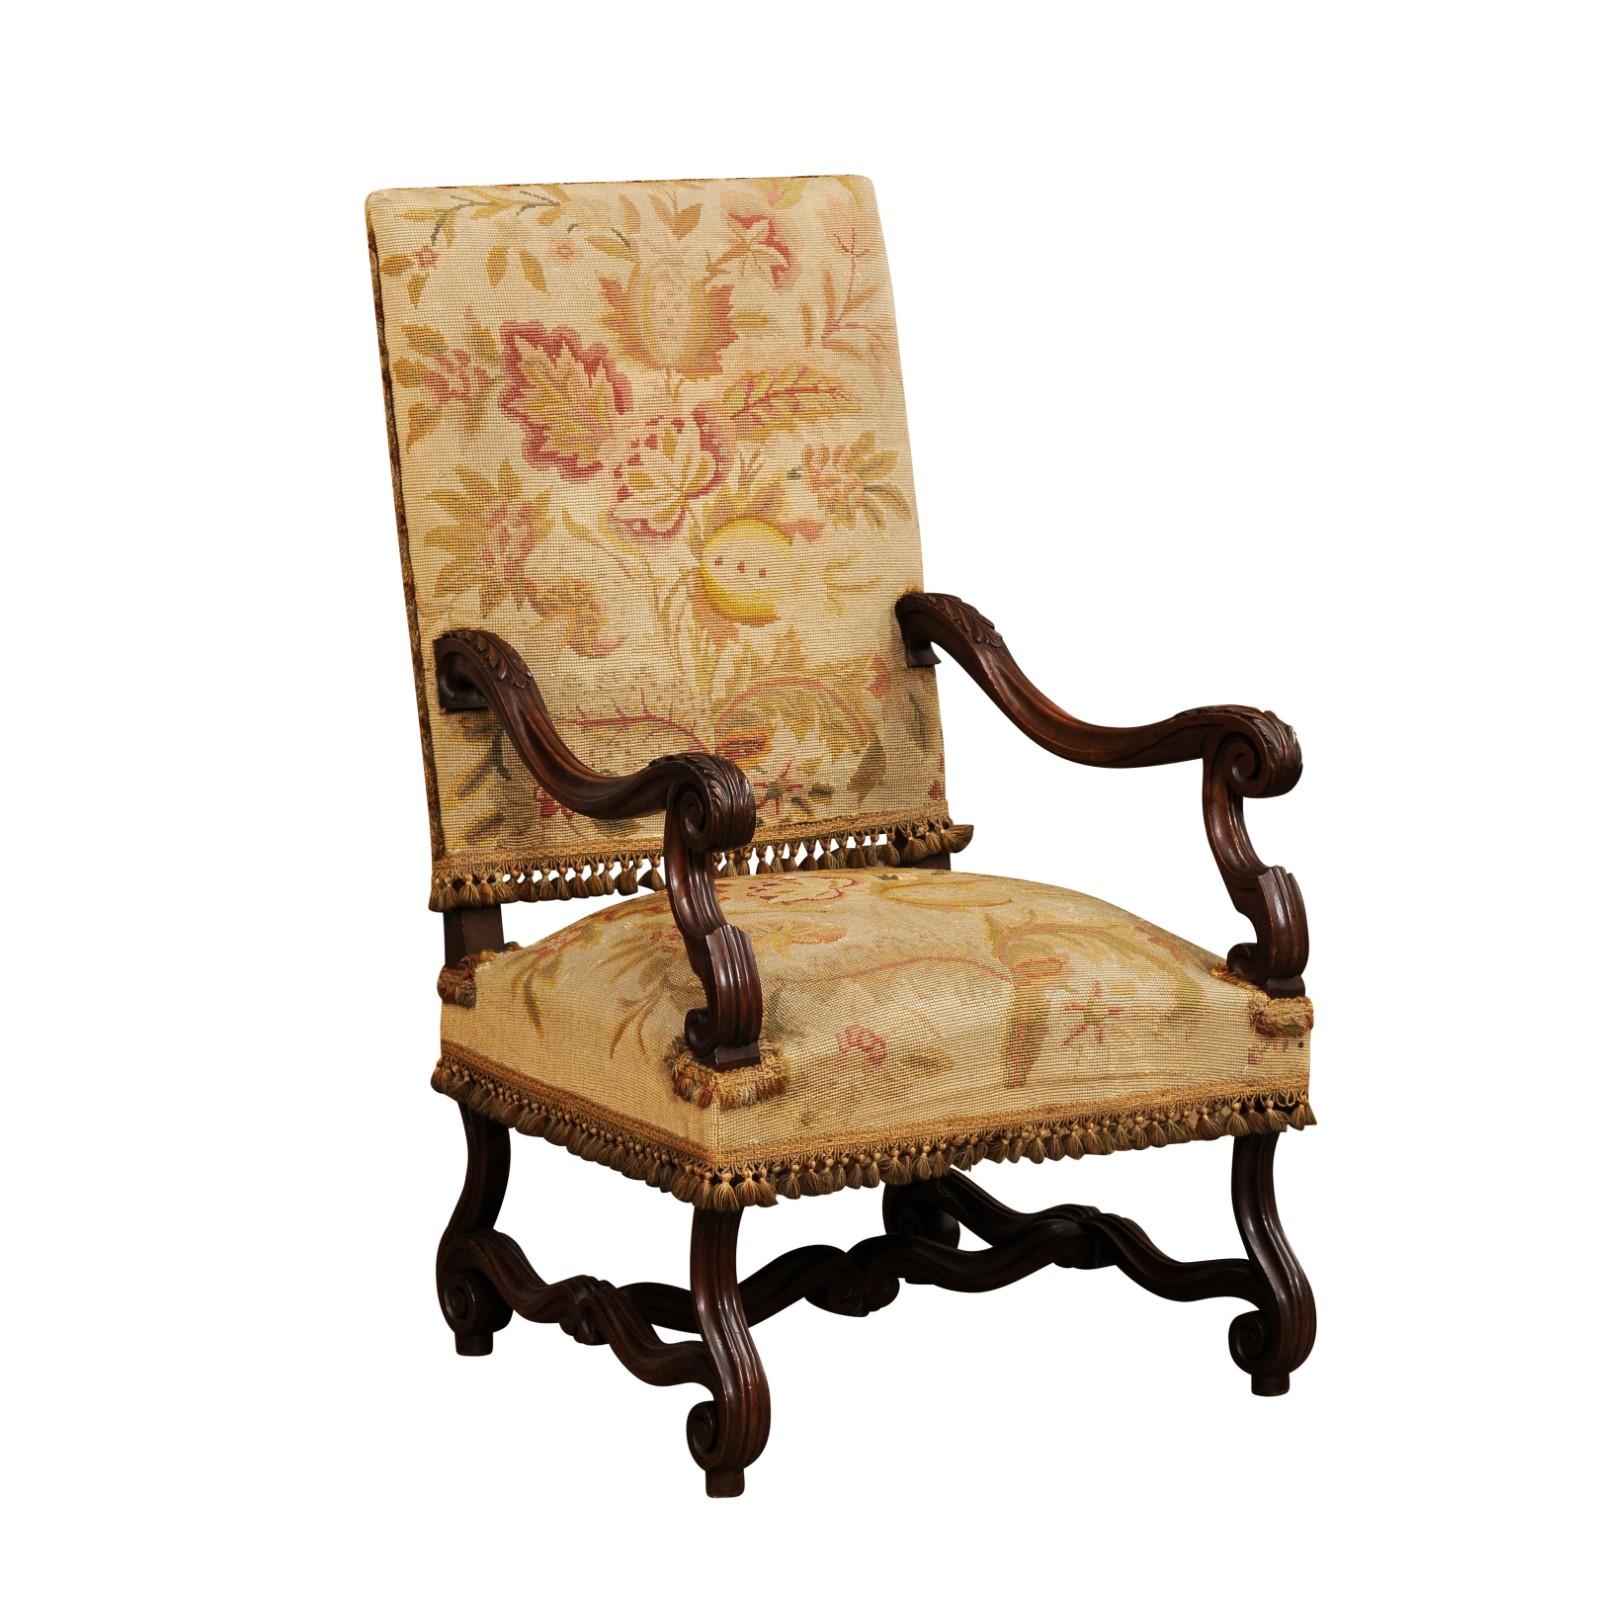 A French walnut Louis XIV style armchair from the 19th century with rectangular slanted back, large scrolling arms, carved acanthus leaves motifs, scrolling legs and carved cross stretcher. Introduce a touch of opulence to your interiors with this